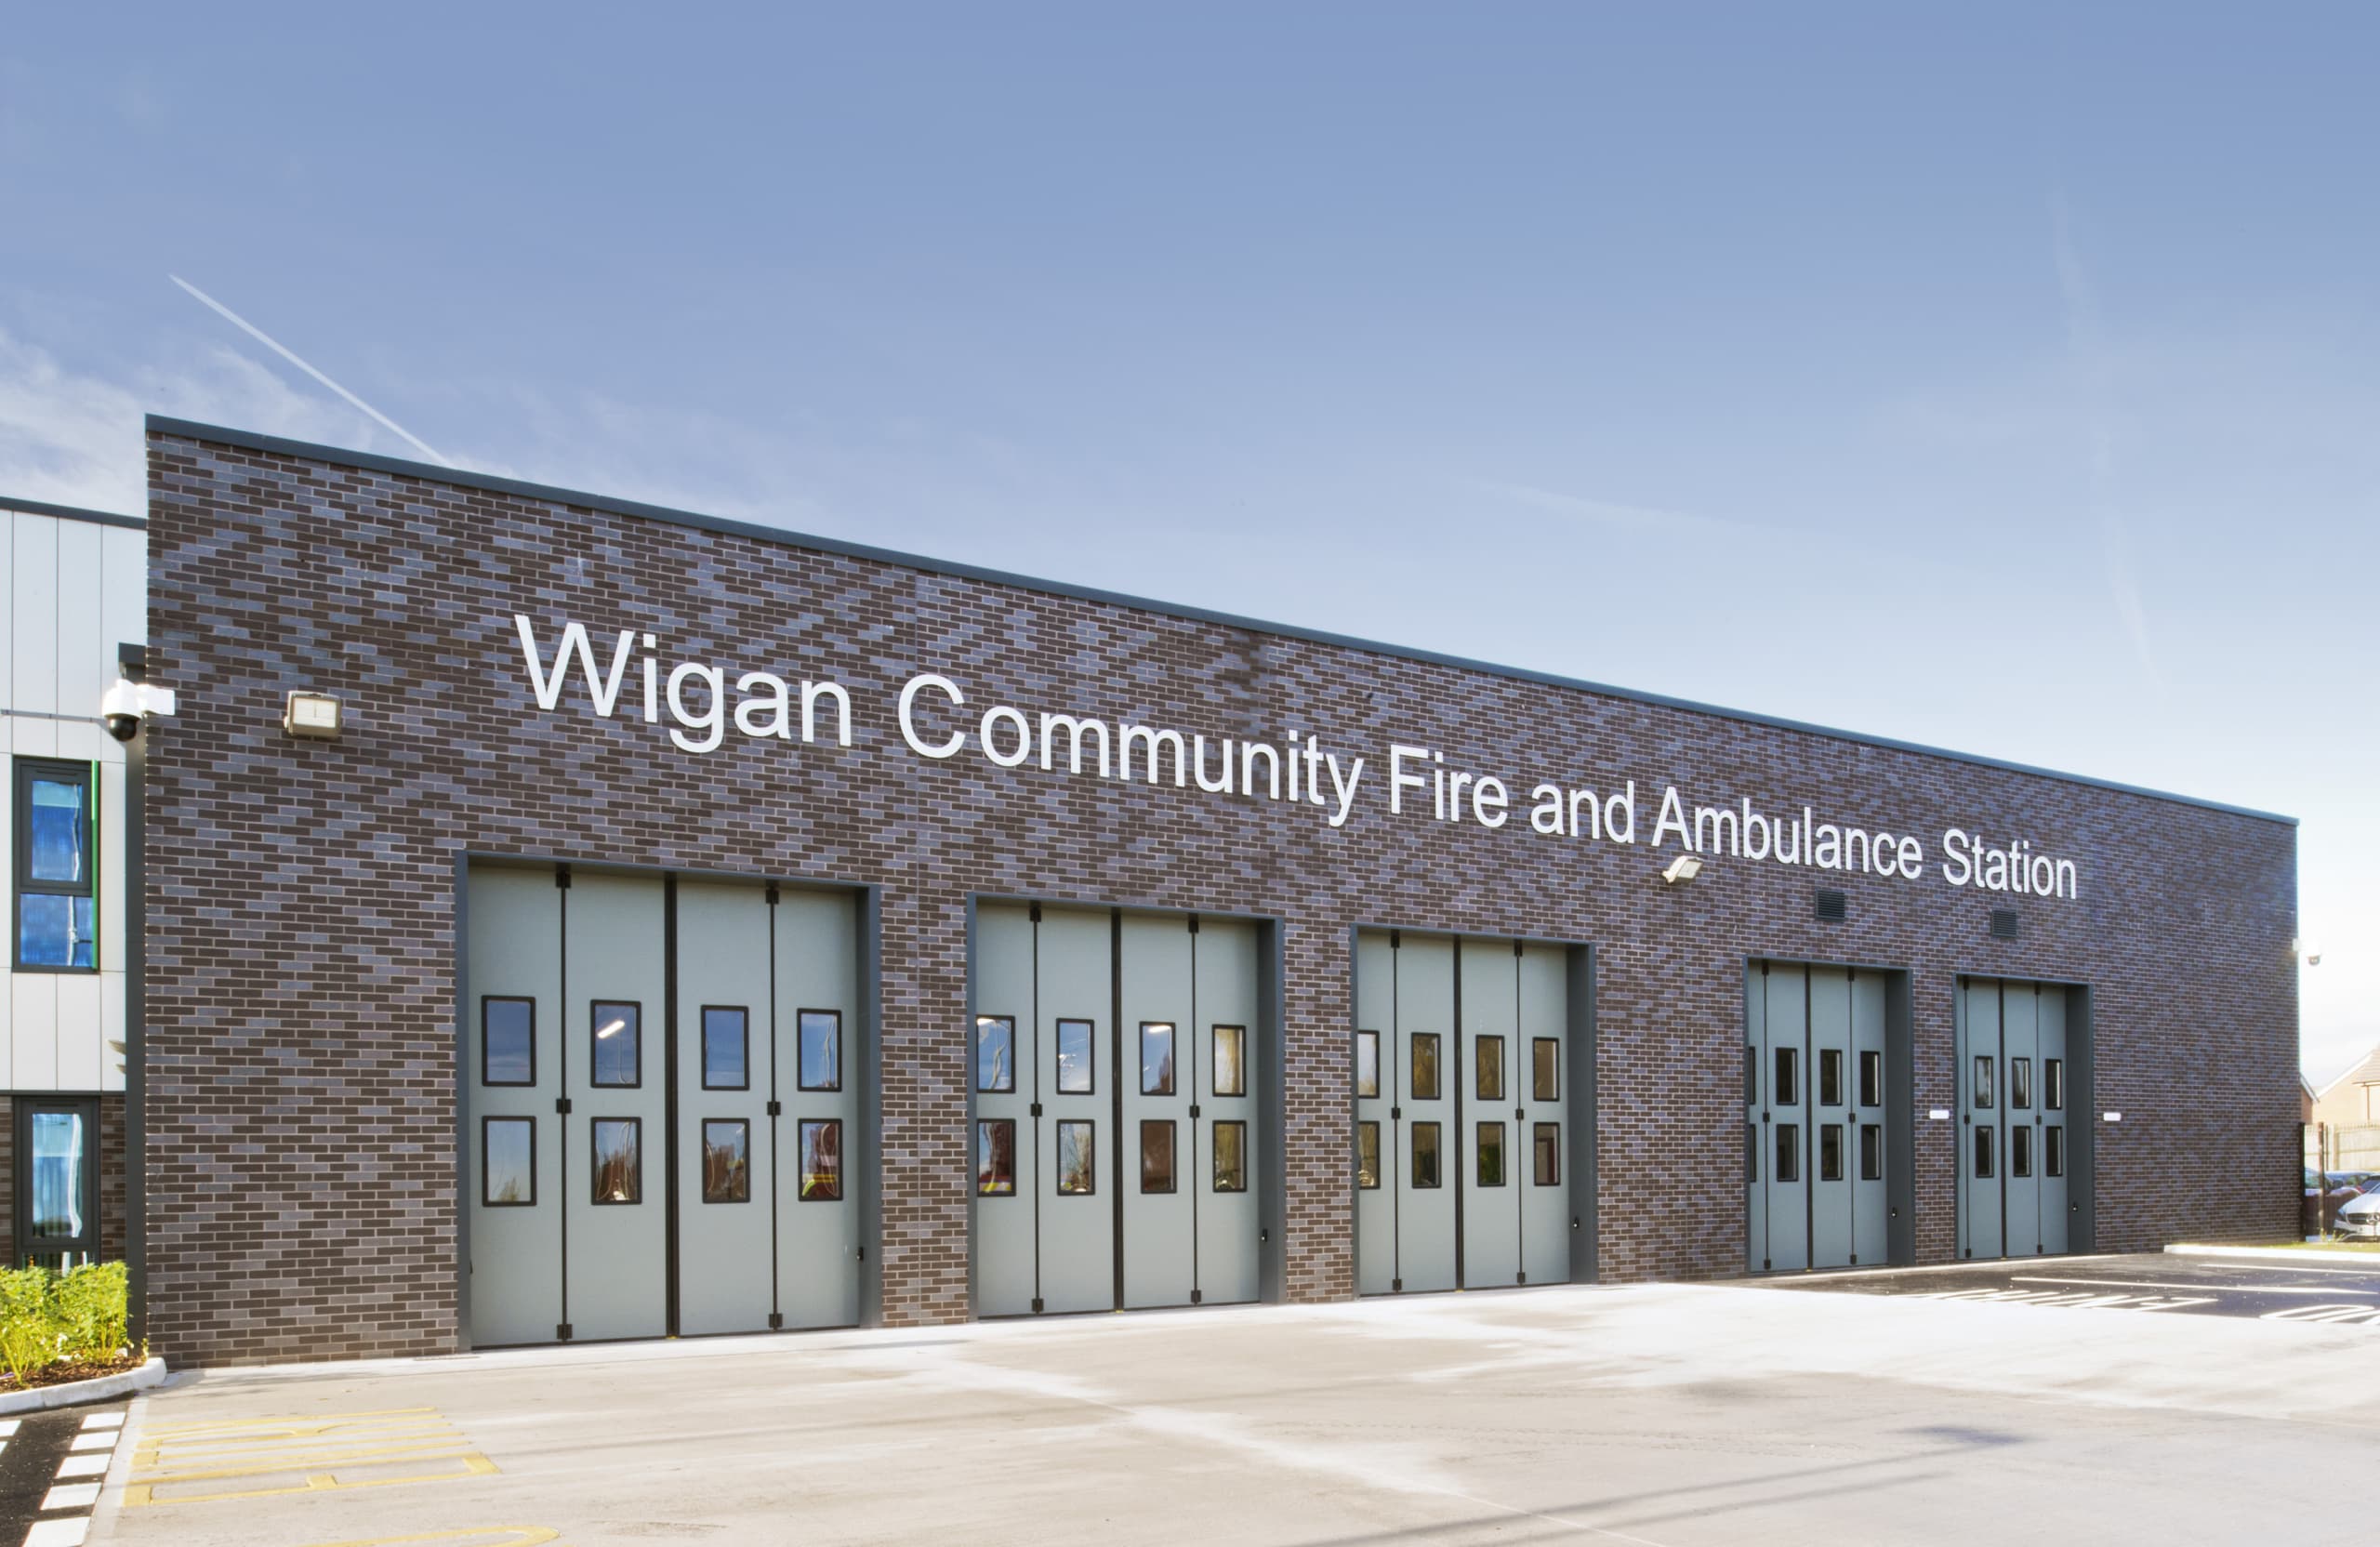 Wigan Fire & Ambulance Station, Wigan, Greater Manchester